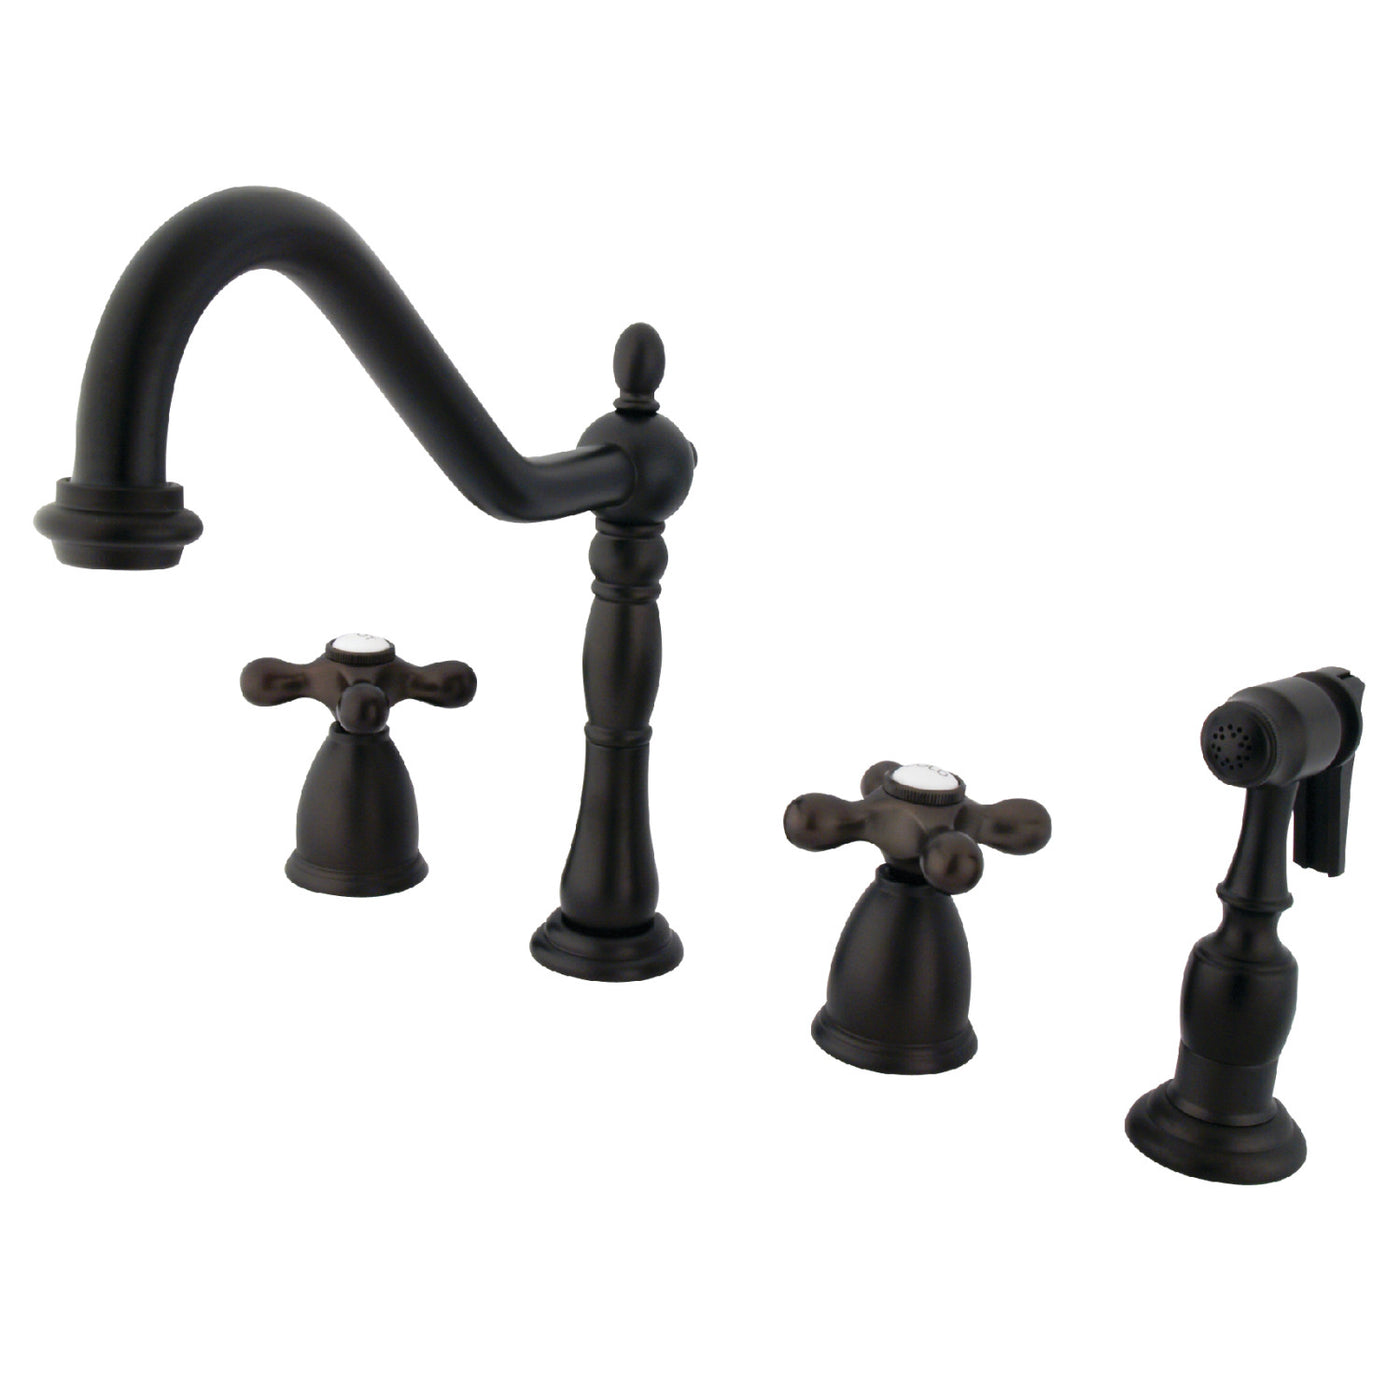 Elements of Design EB1795AXBS Widespread Kitchen Faucet with Brass Sprayer, Oil Rubbed Bronze